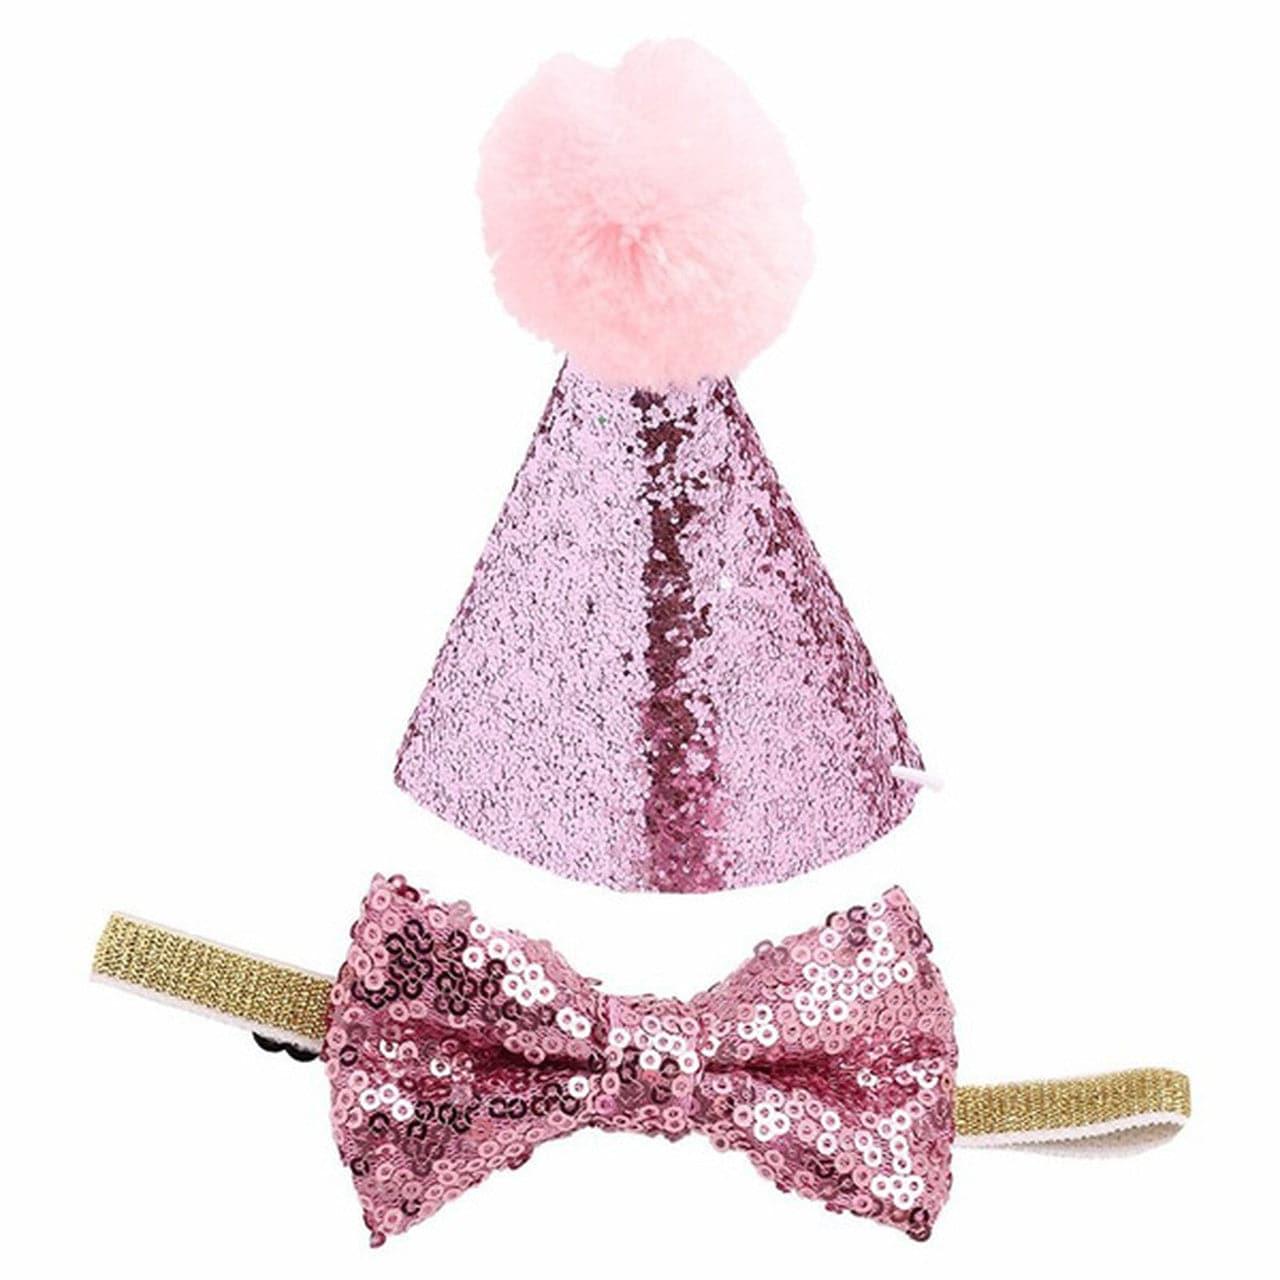 glitter party hat with bow tie pink